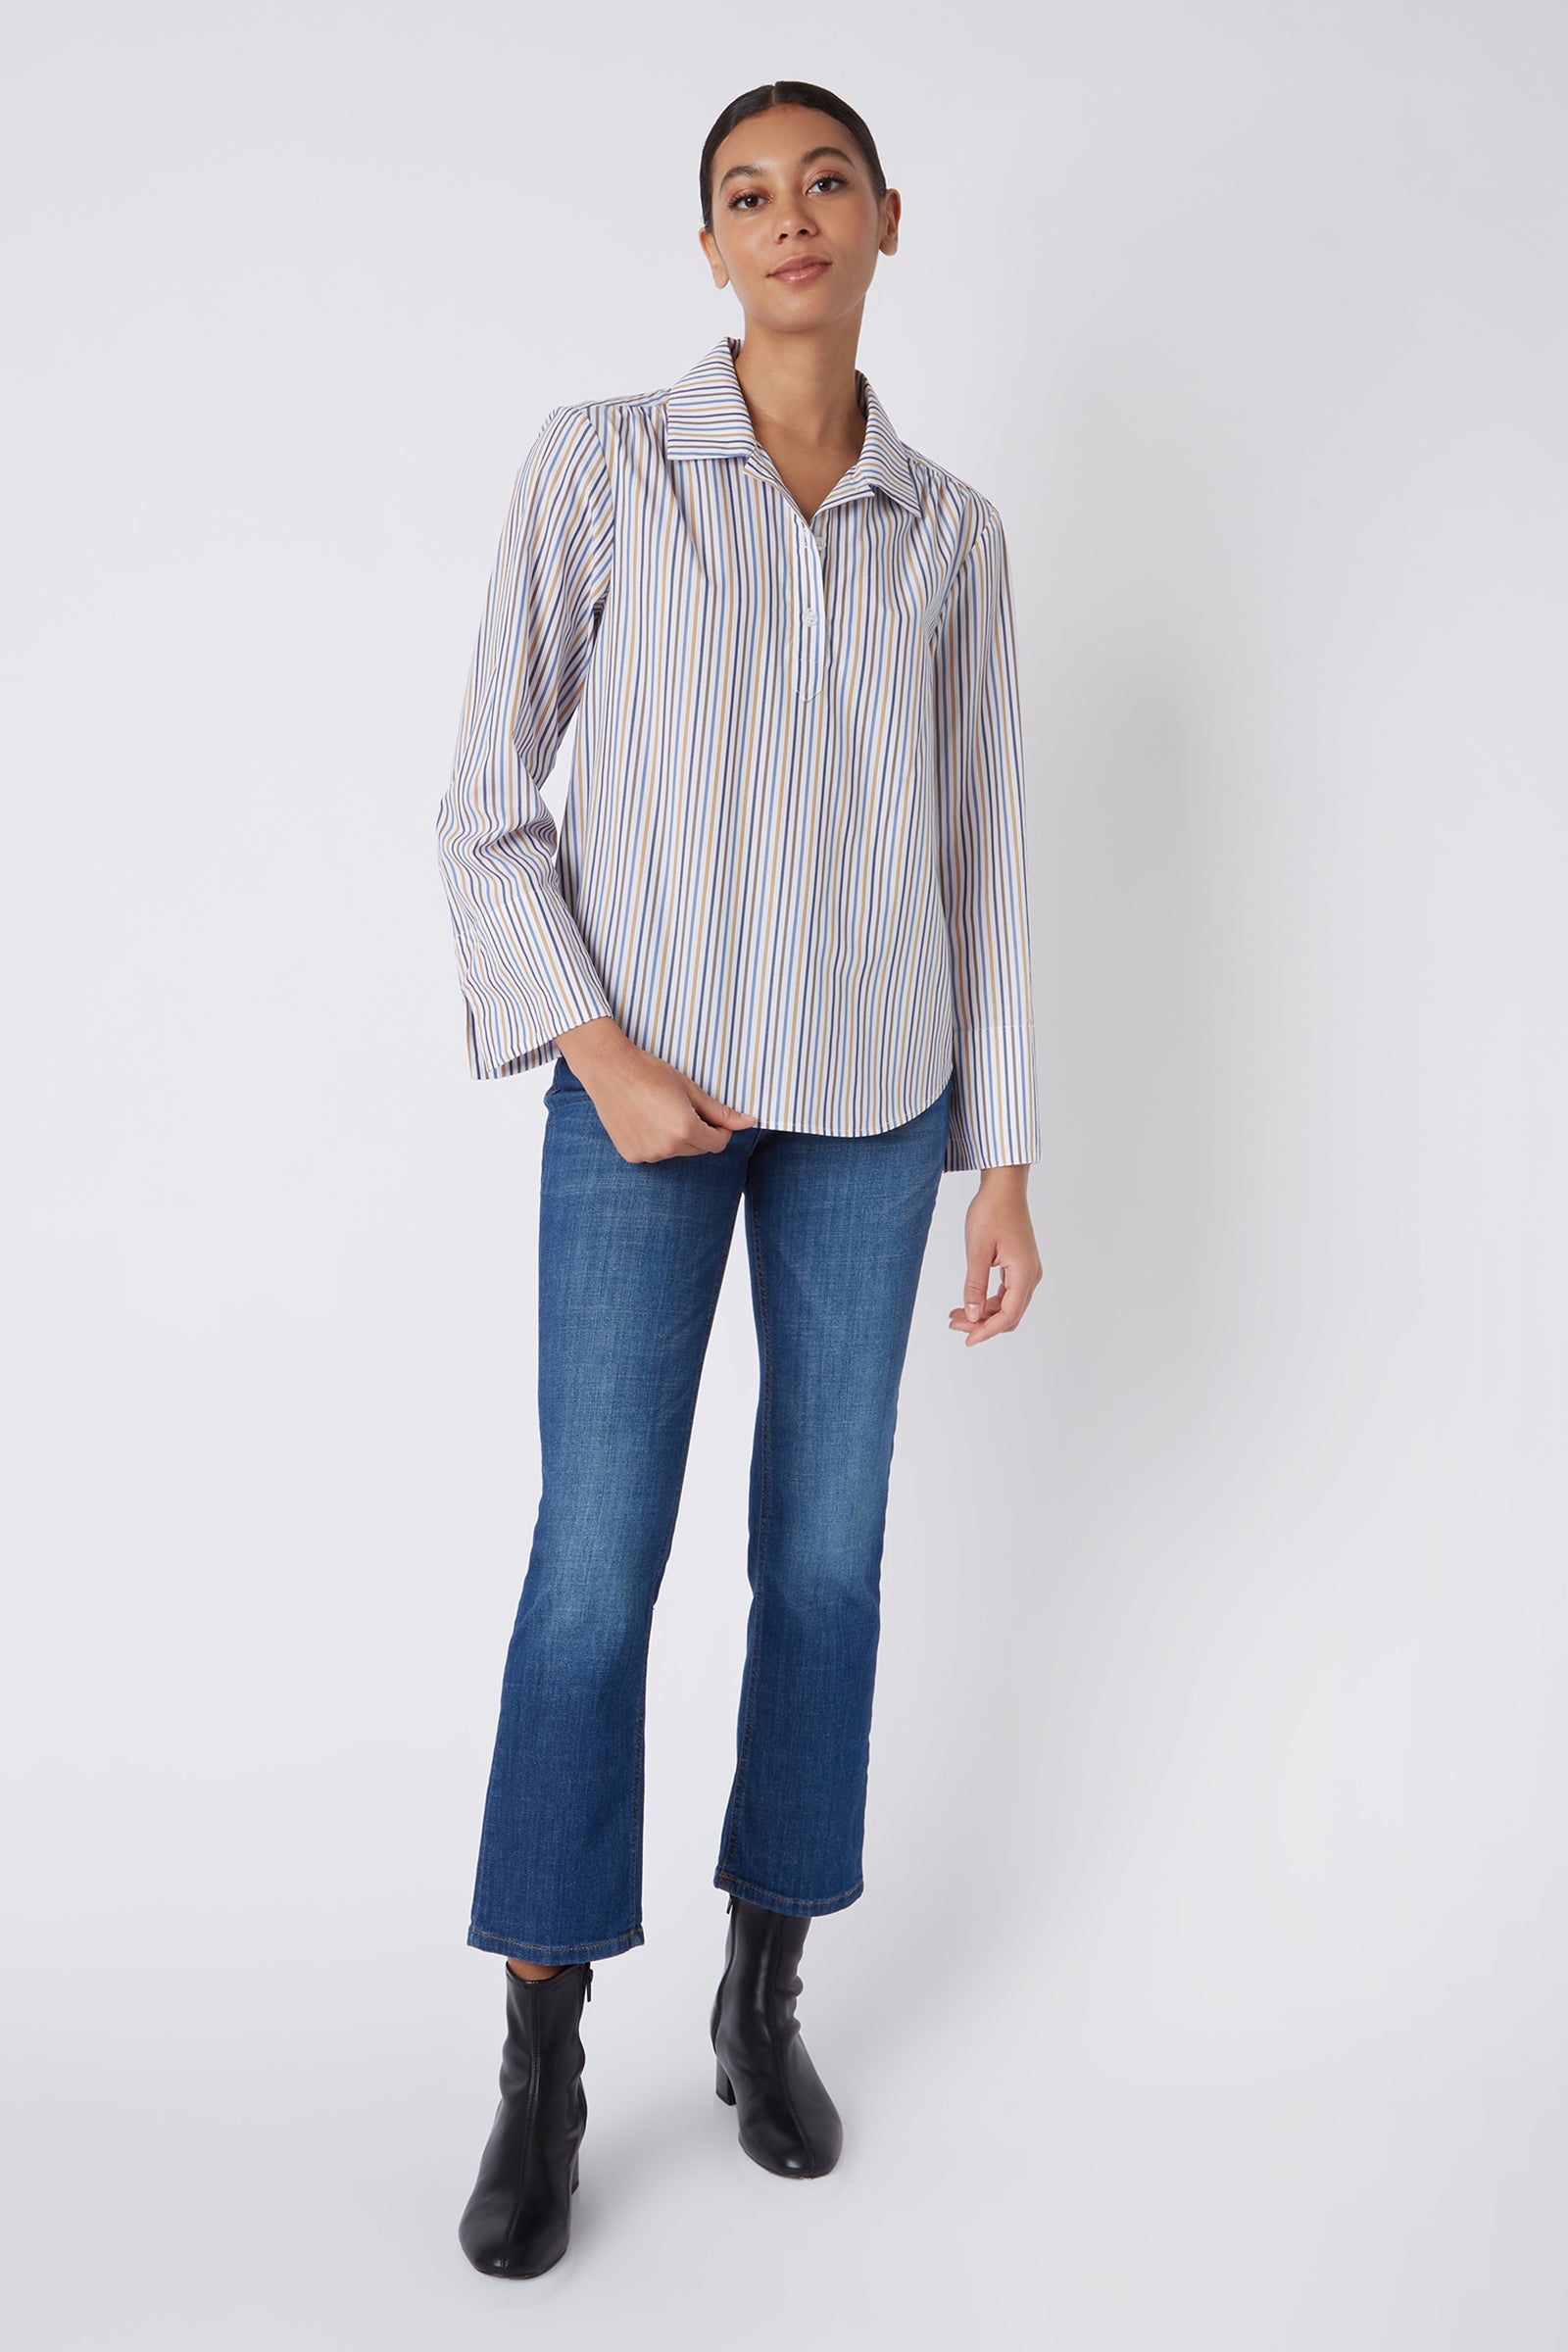 Kal Rieman Edie Collared Placket Shirt in Multi Stripe Gold on Model Full Front View